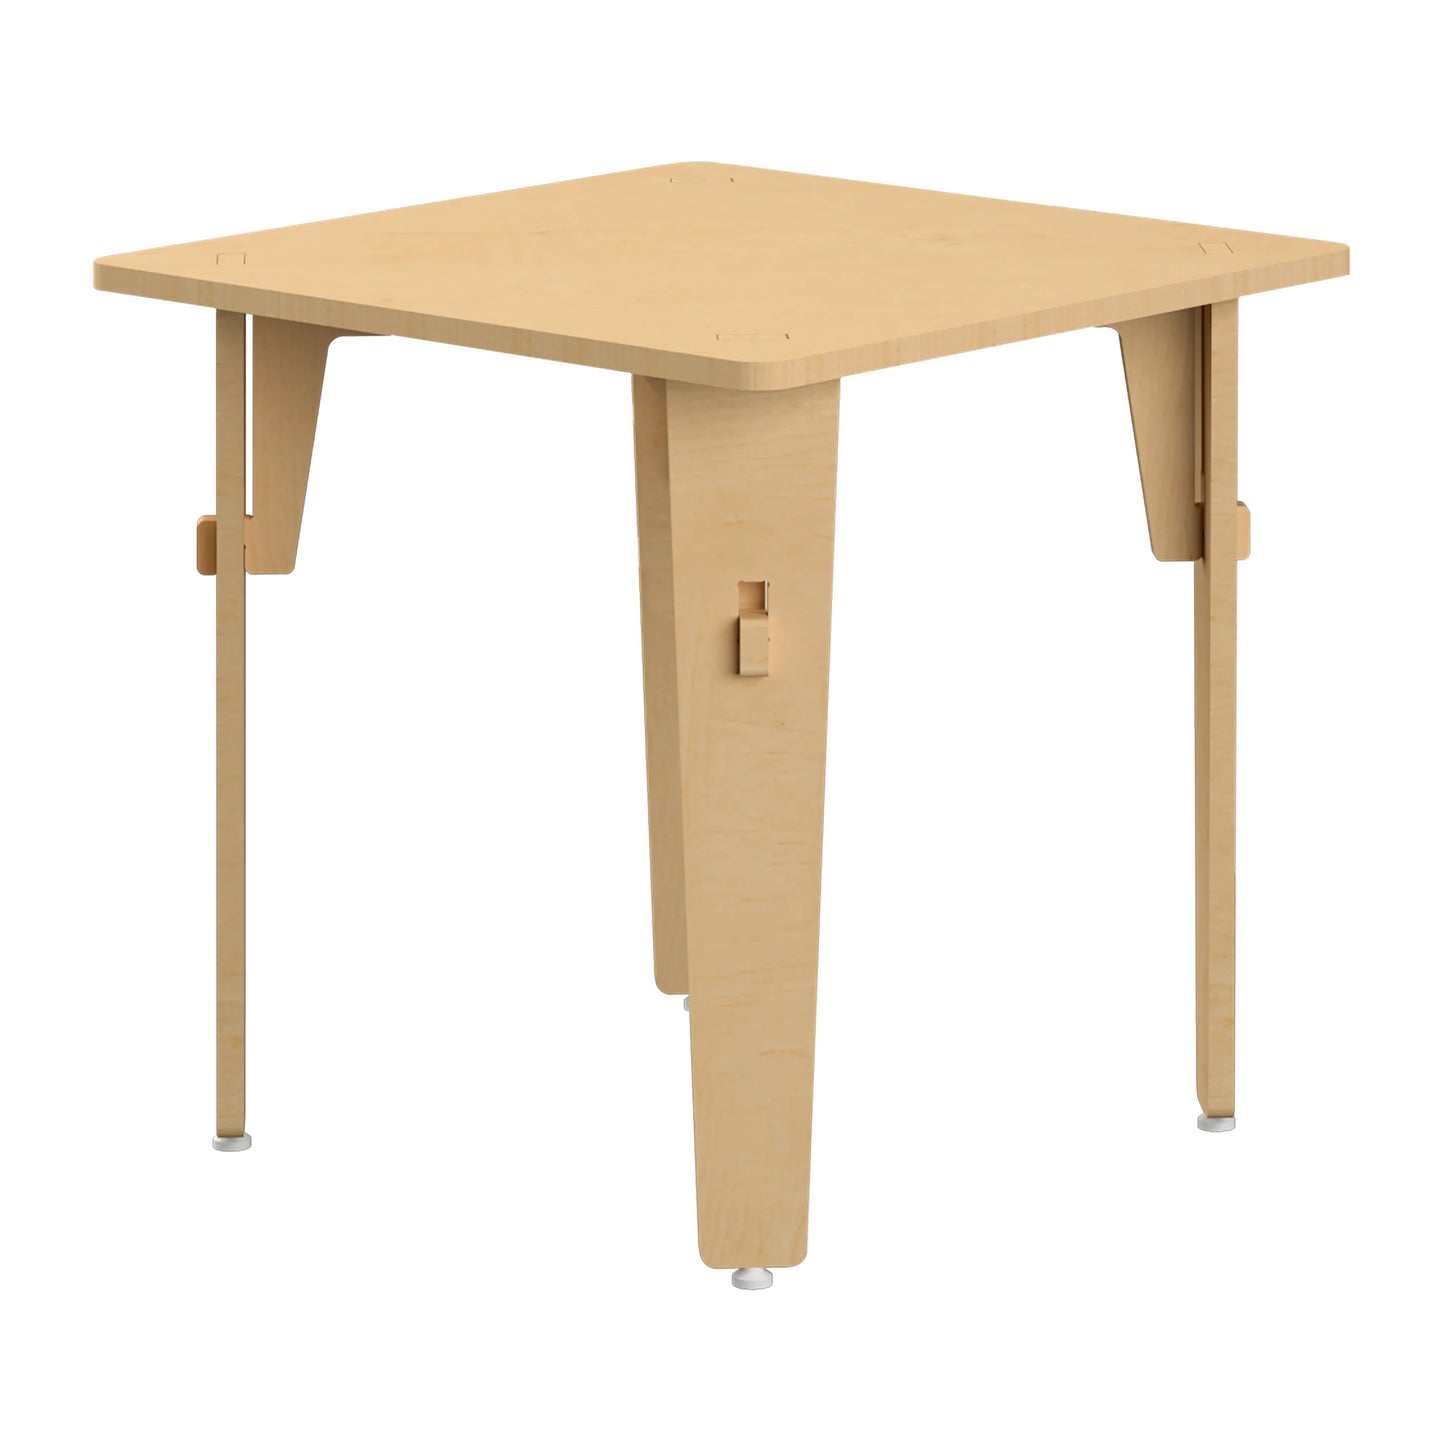 Buy Lime Fig Wooden Table - Natural (21 Inches) - Strong Wood - SkilloToys.com